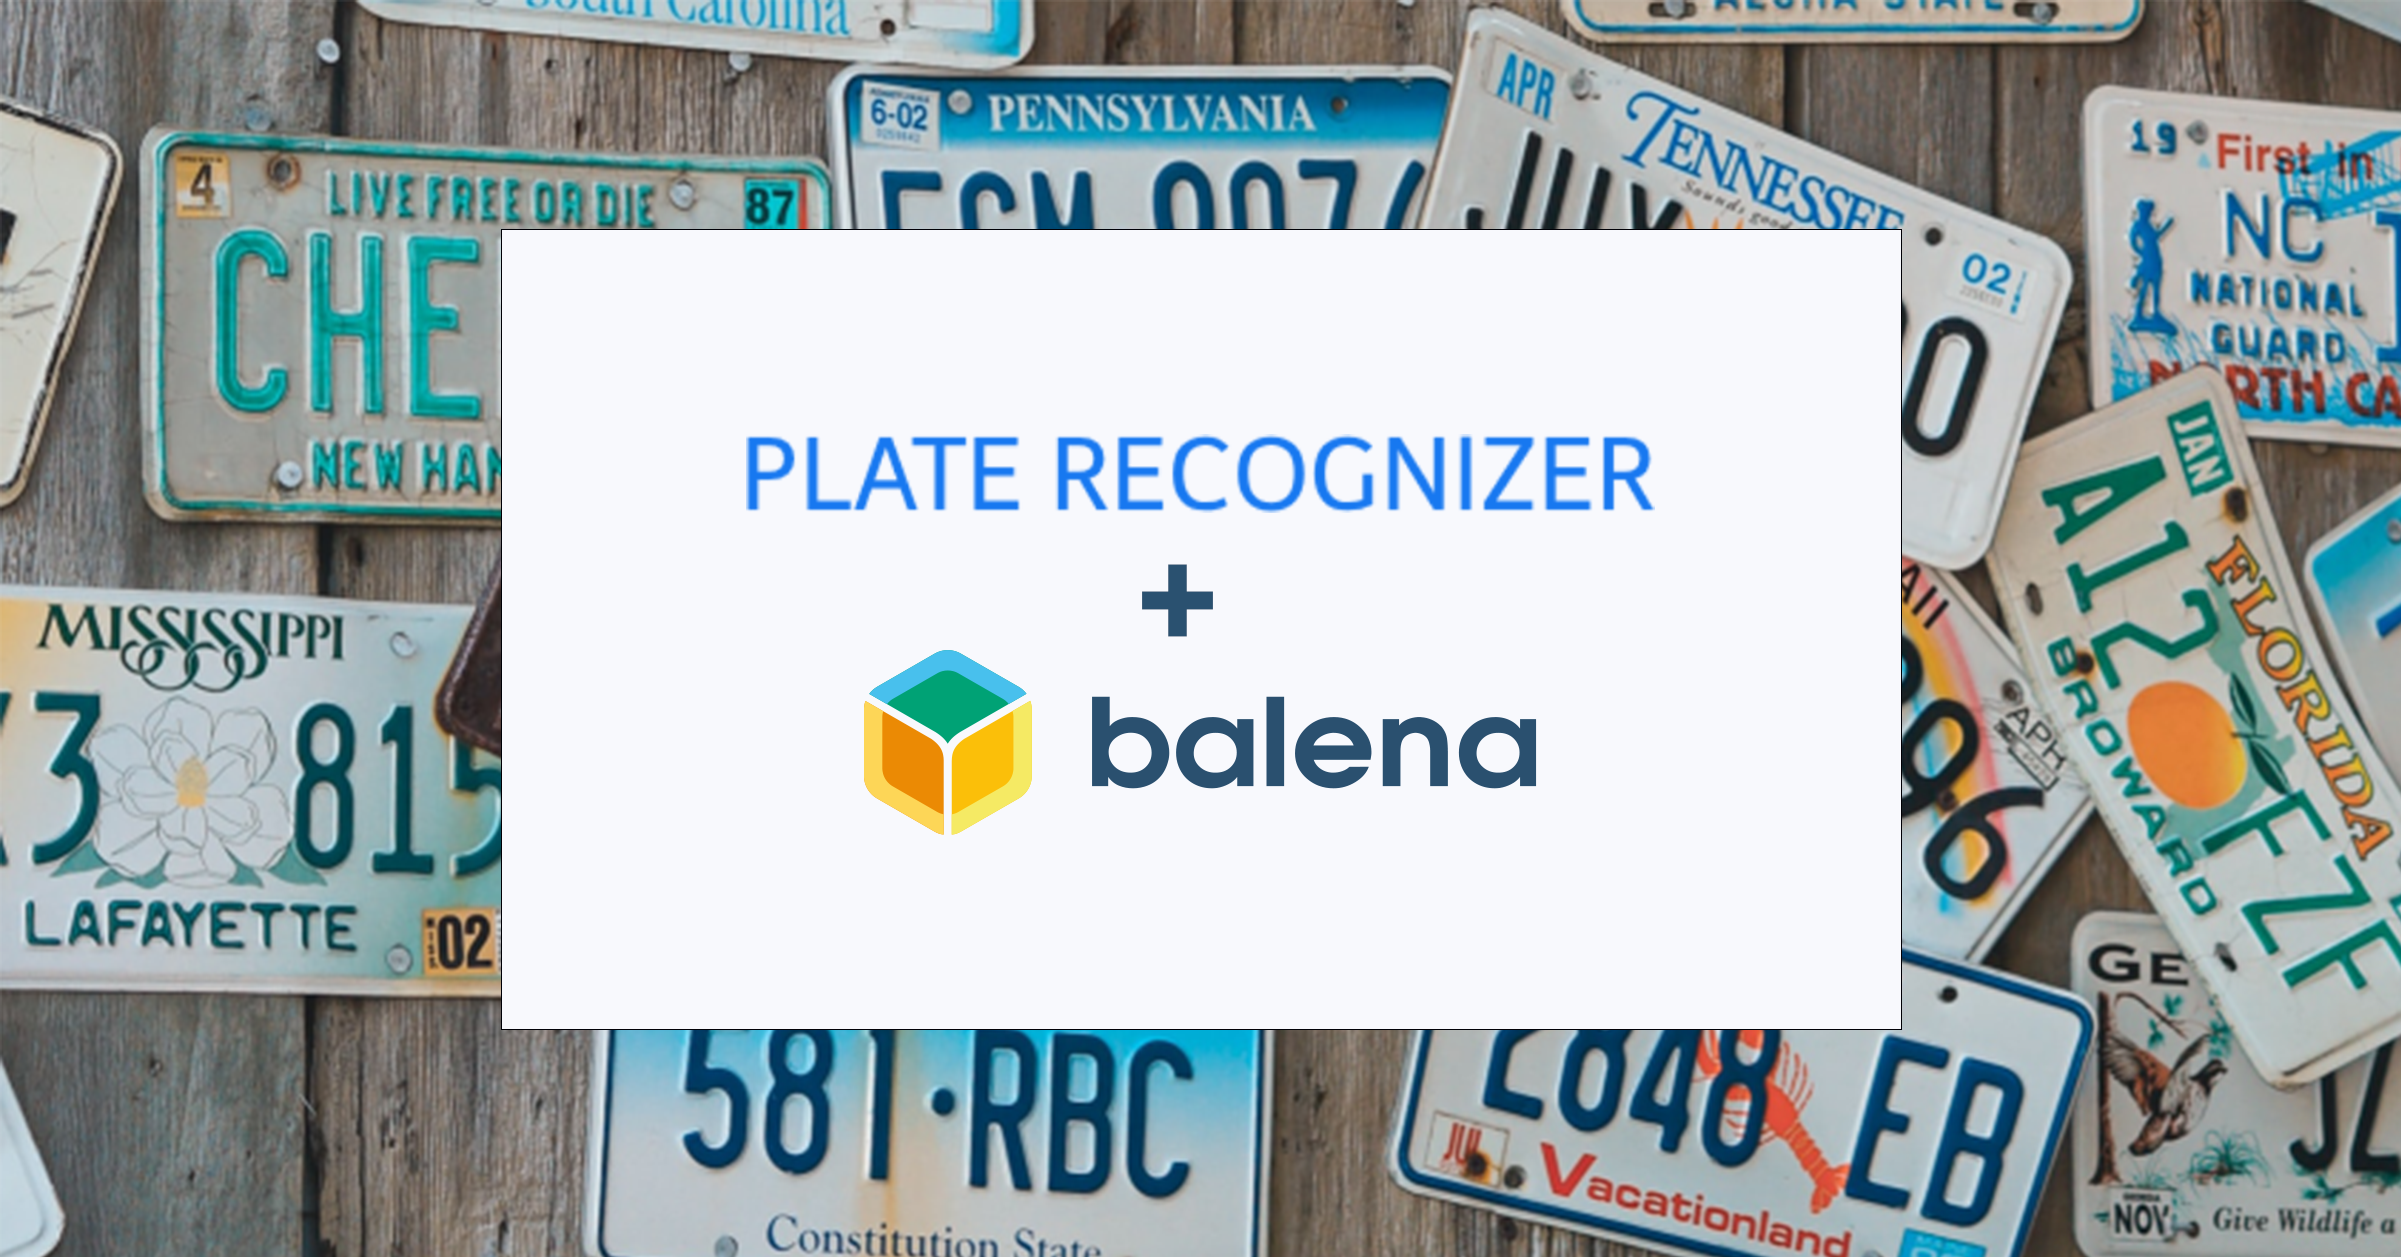 Deploy and manage Plate Recognizer with balena